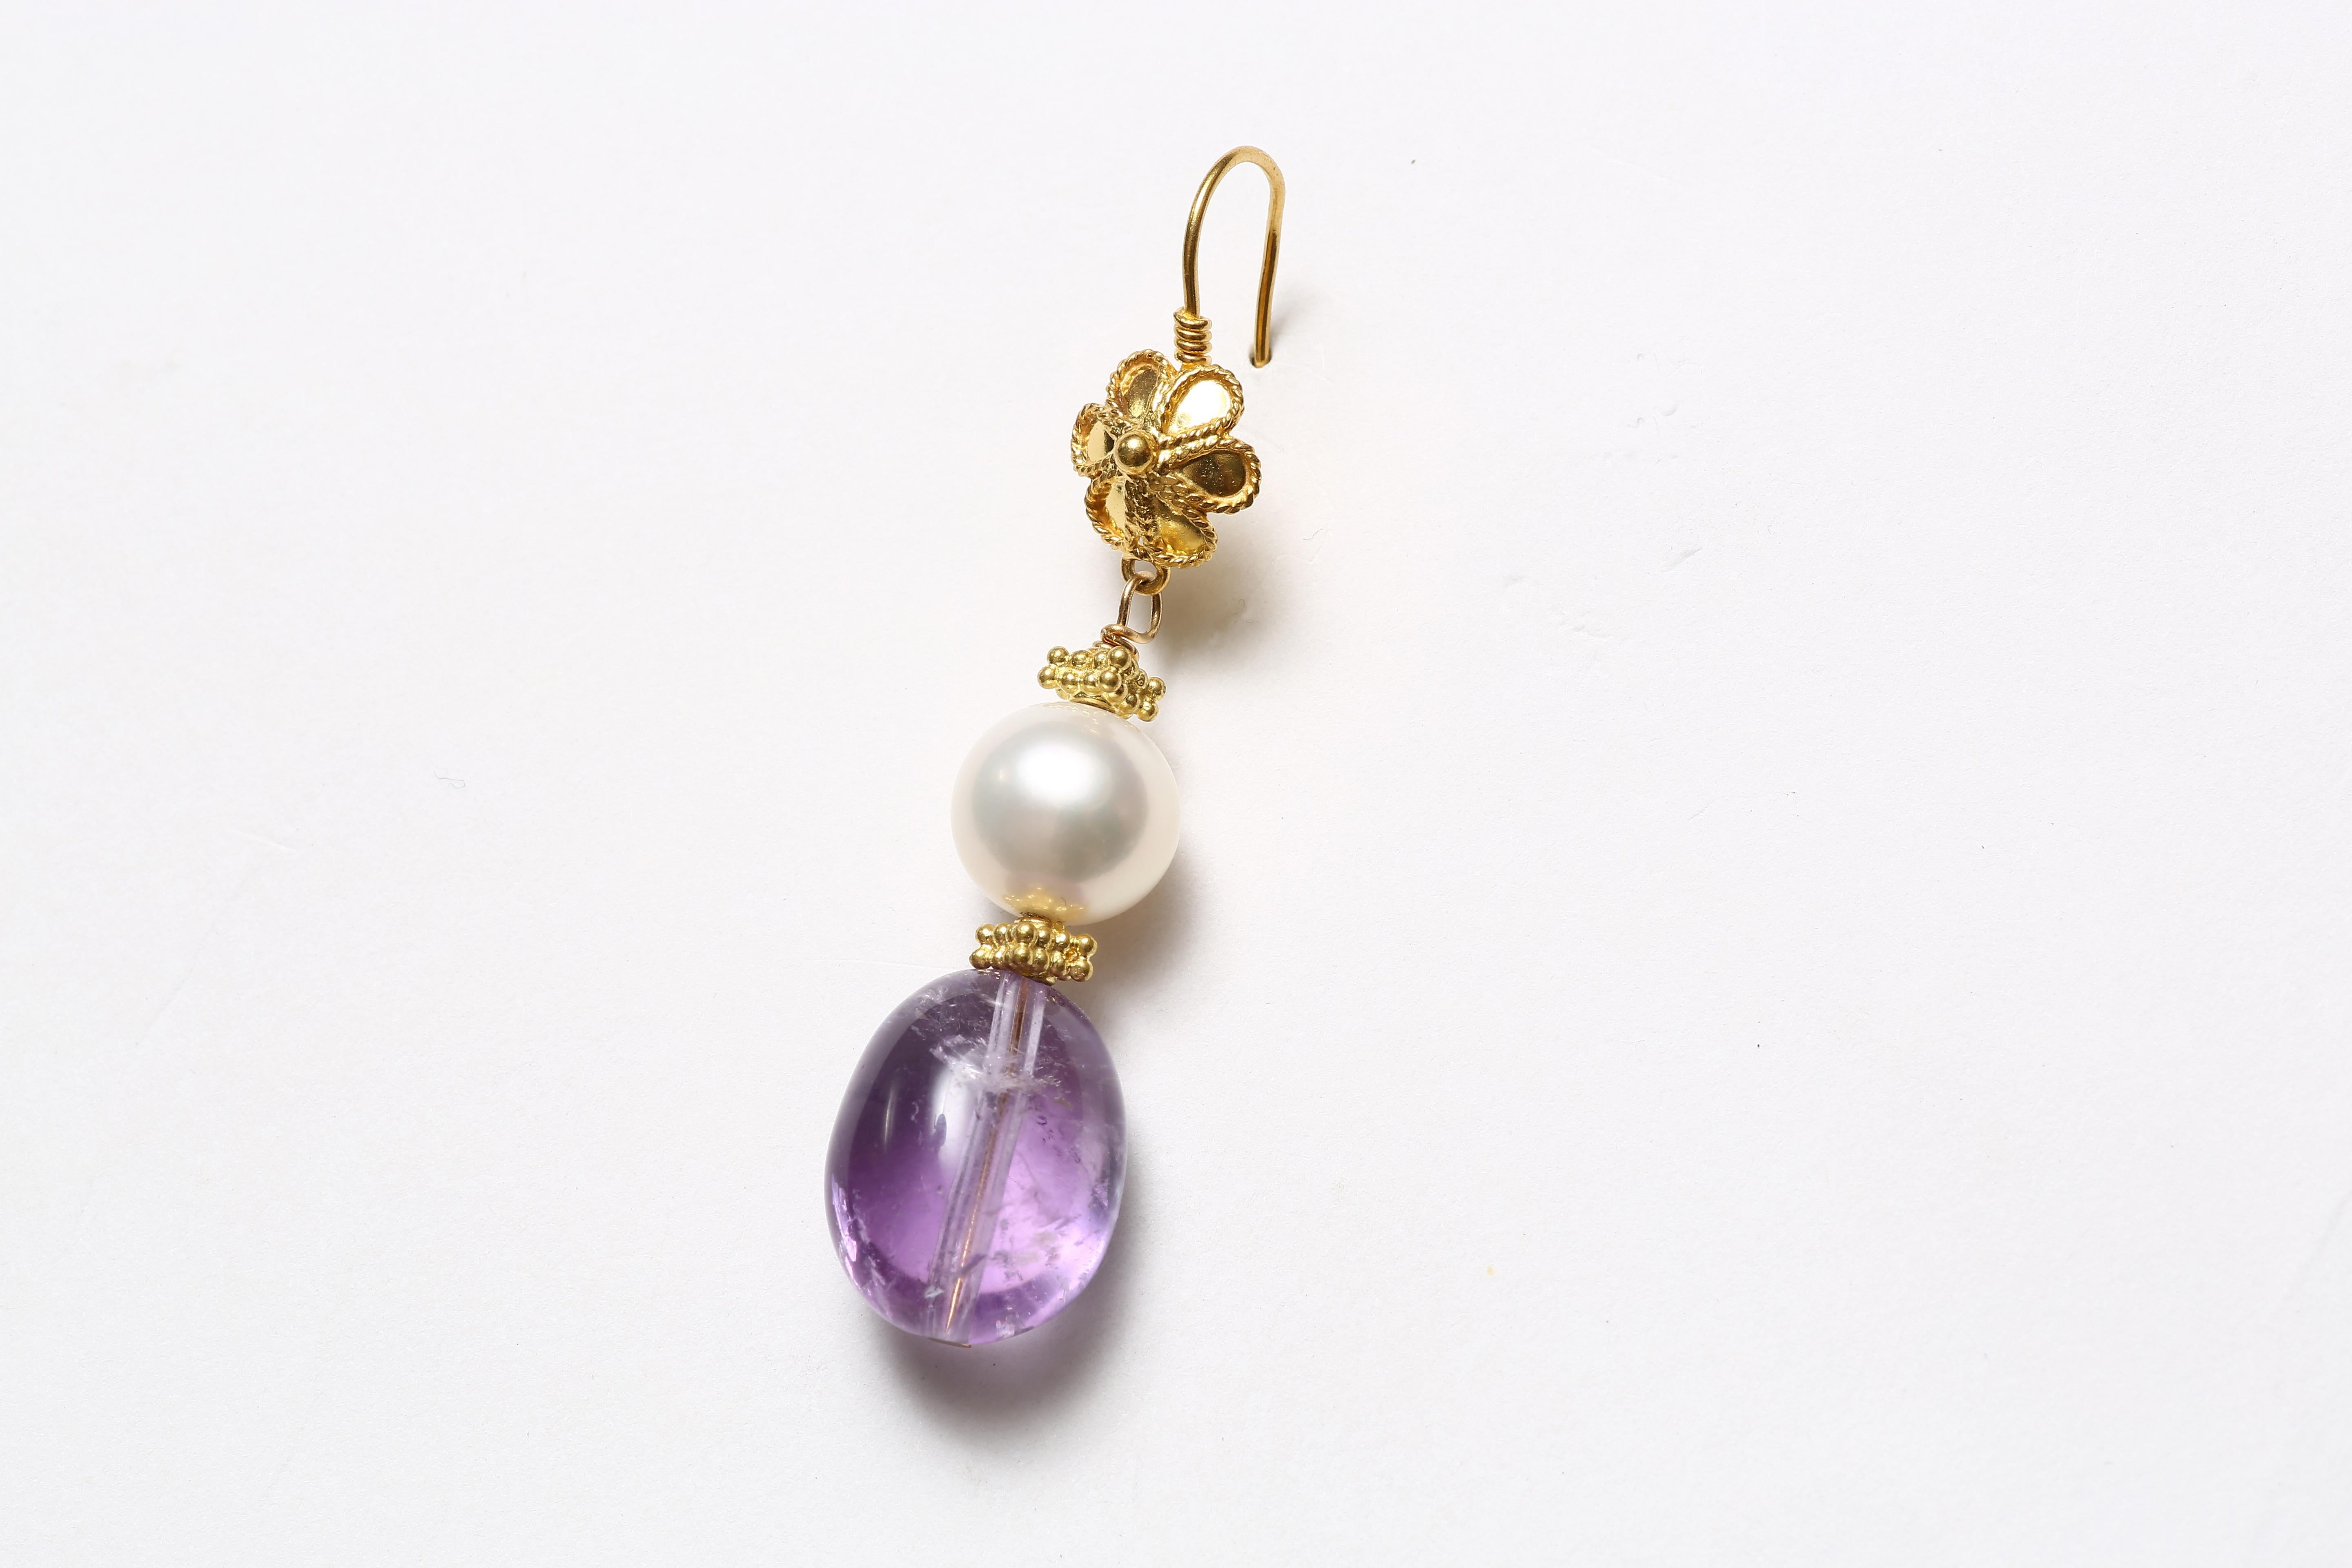 The charming pair of earrings with hand-worked 18K solid gold floral hooks, fresh water pearls and  amethyst drops. 